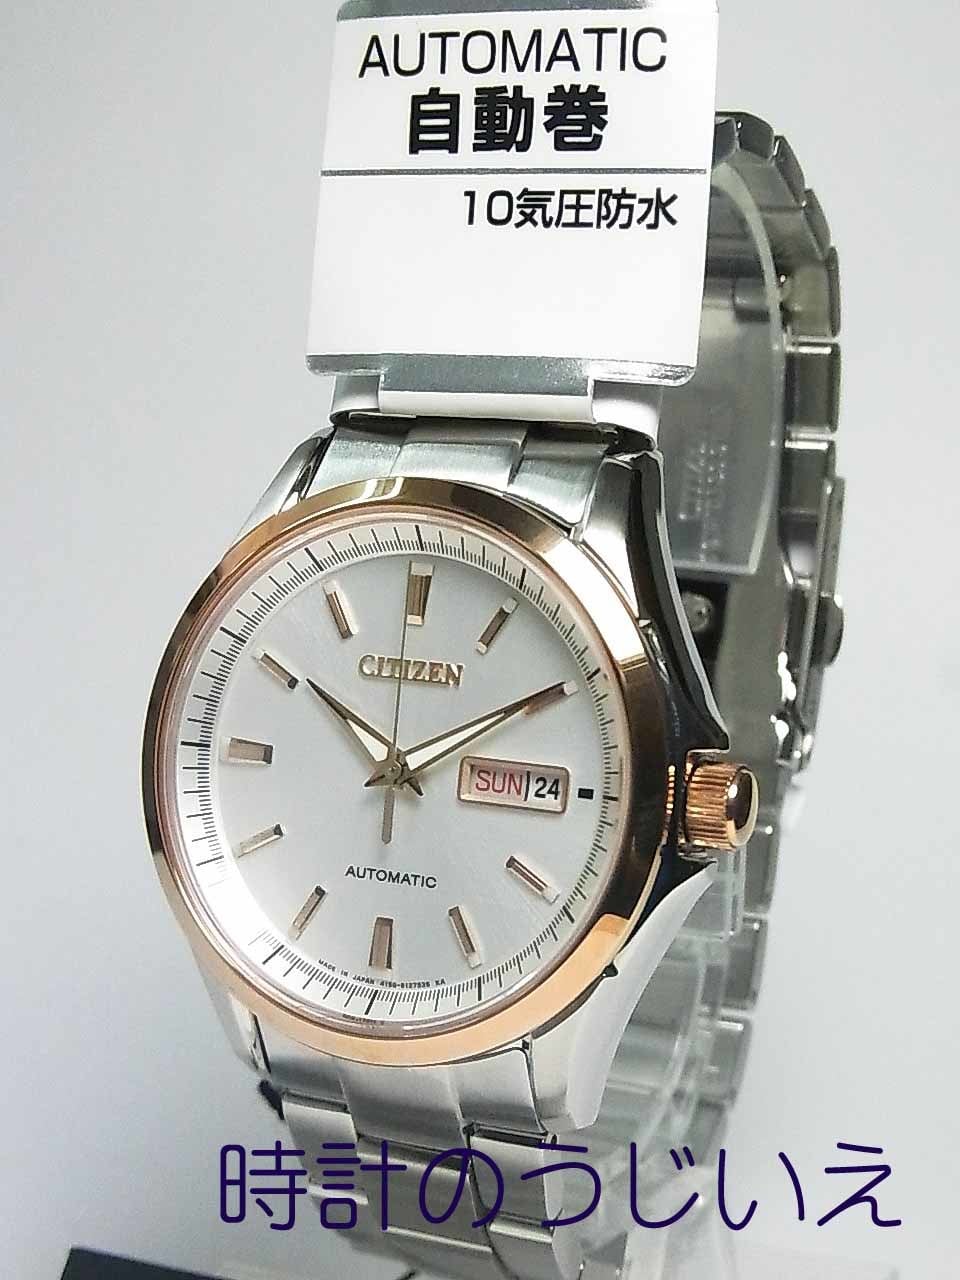 CITIZEN MEN'S Watch Automatic(自動巻) NP4044-53A 定価￥42,000 